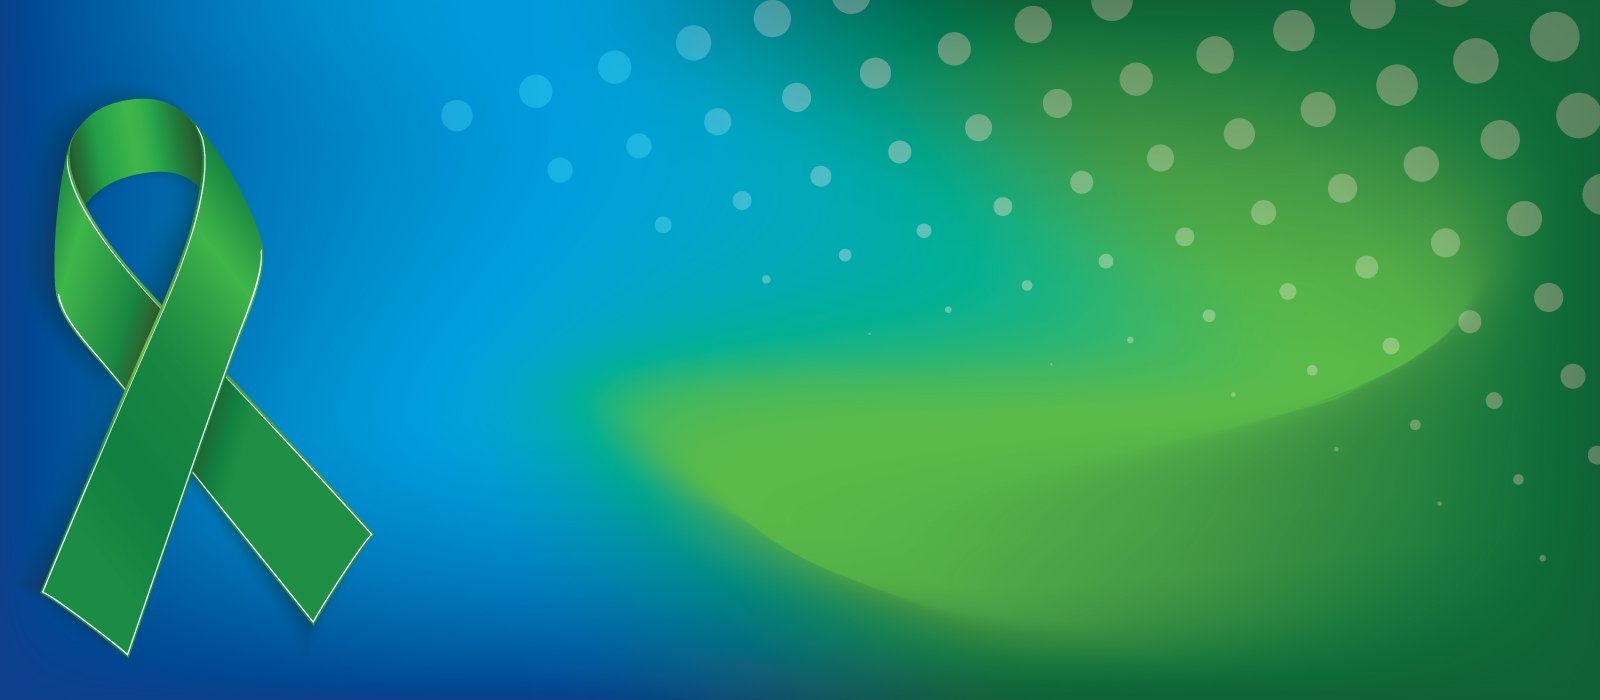 Blue background with green banner